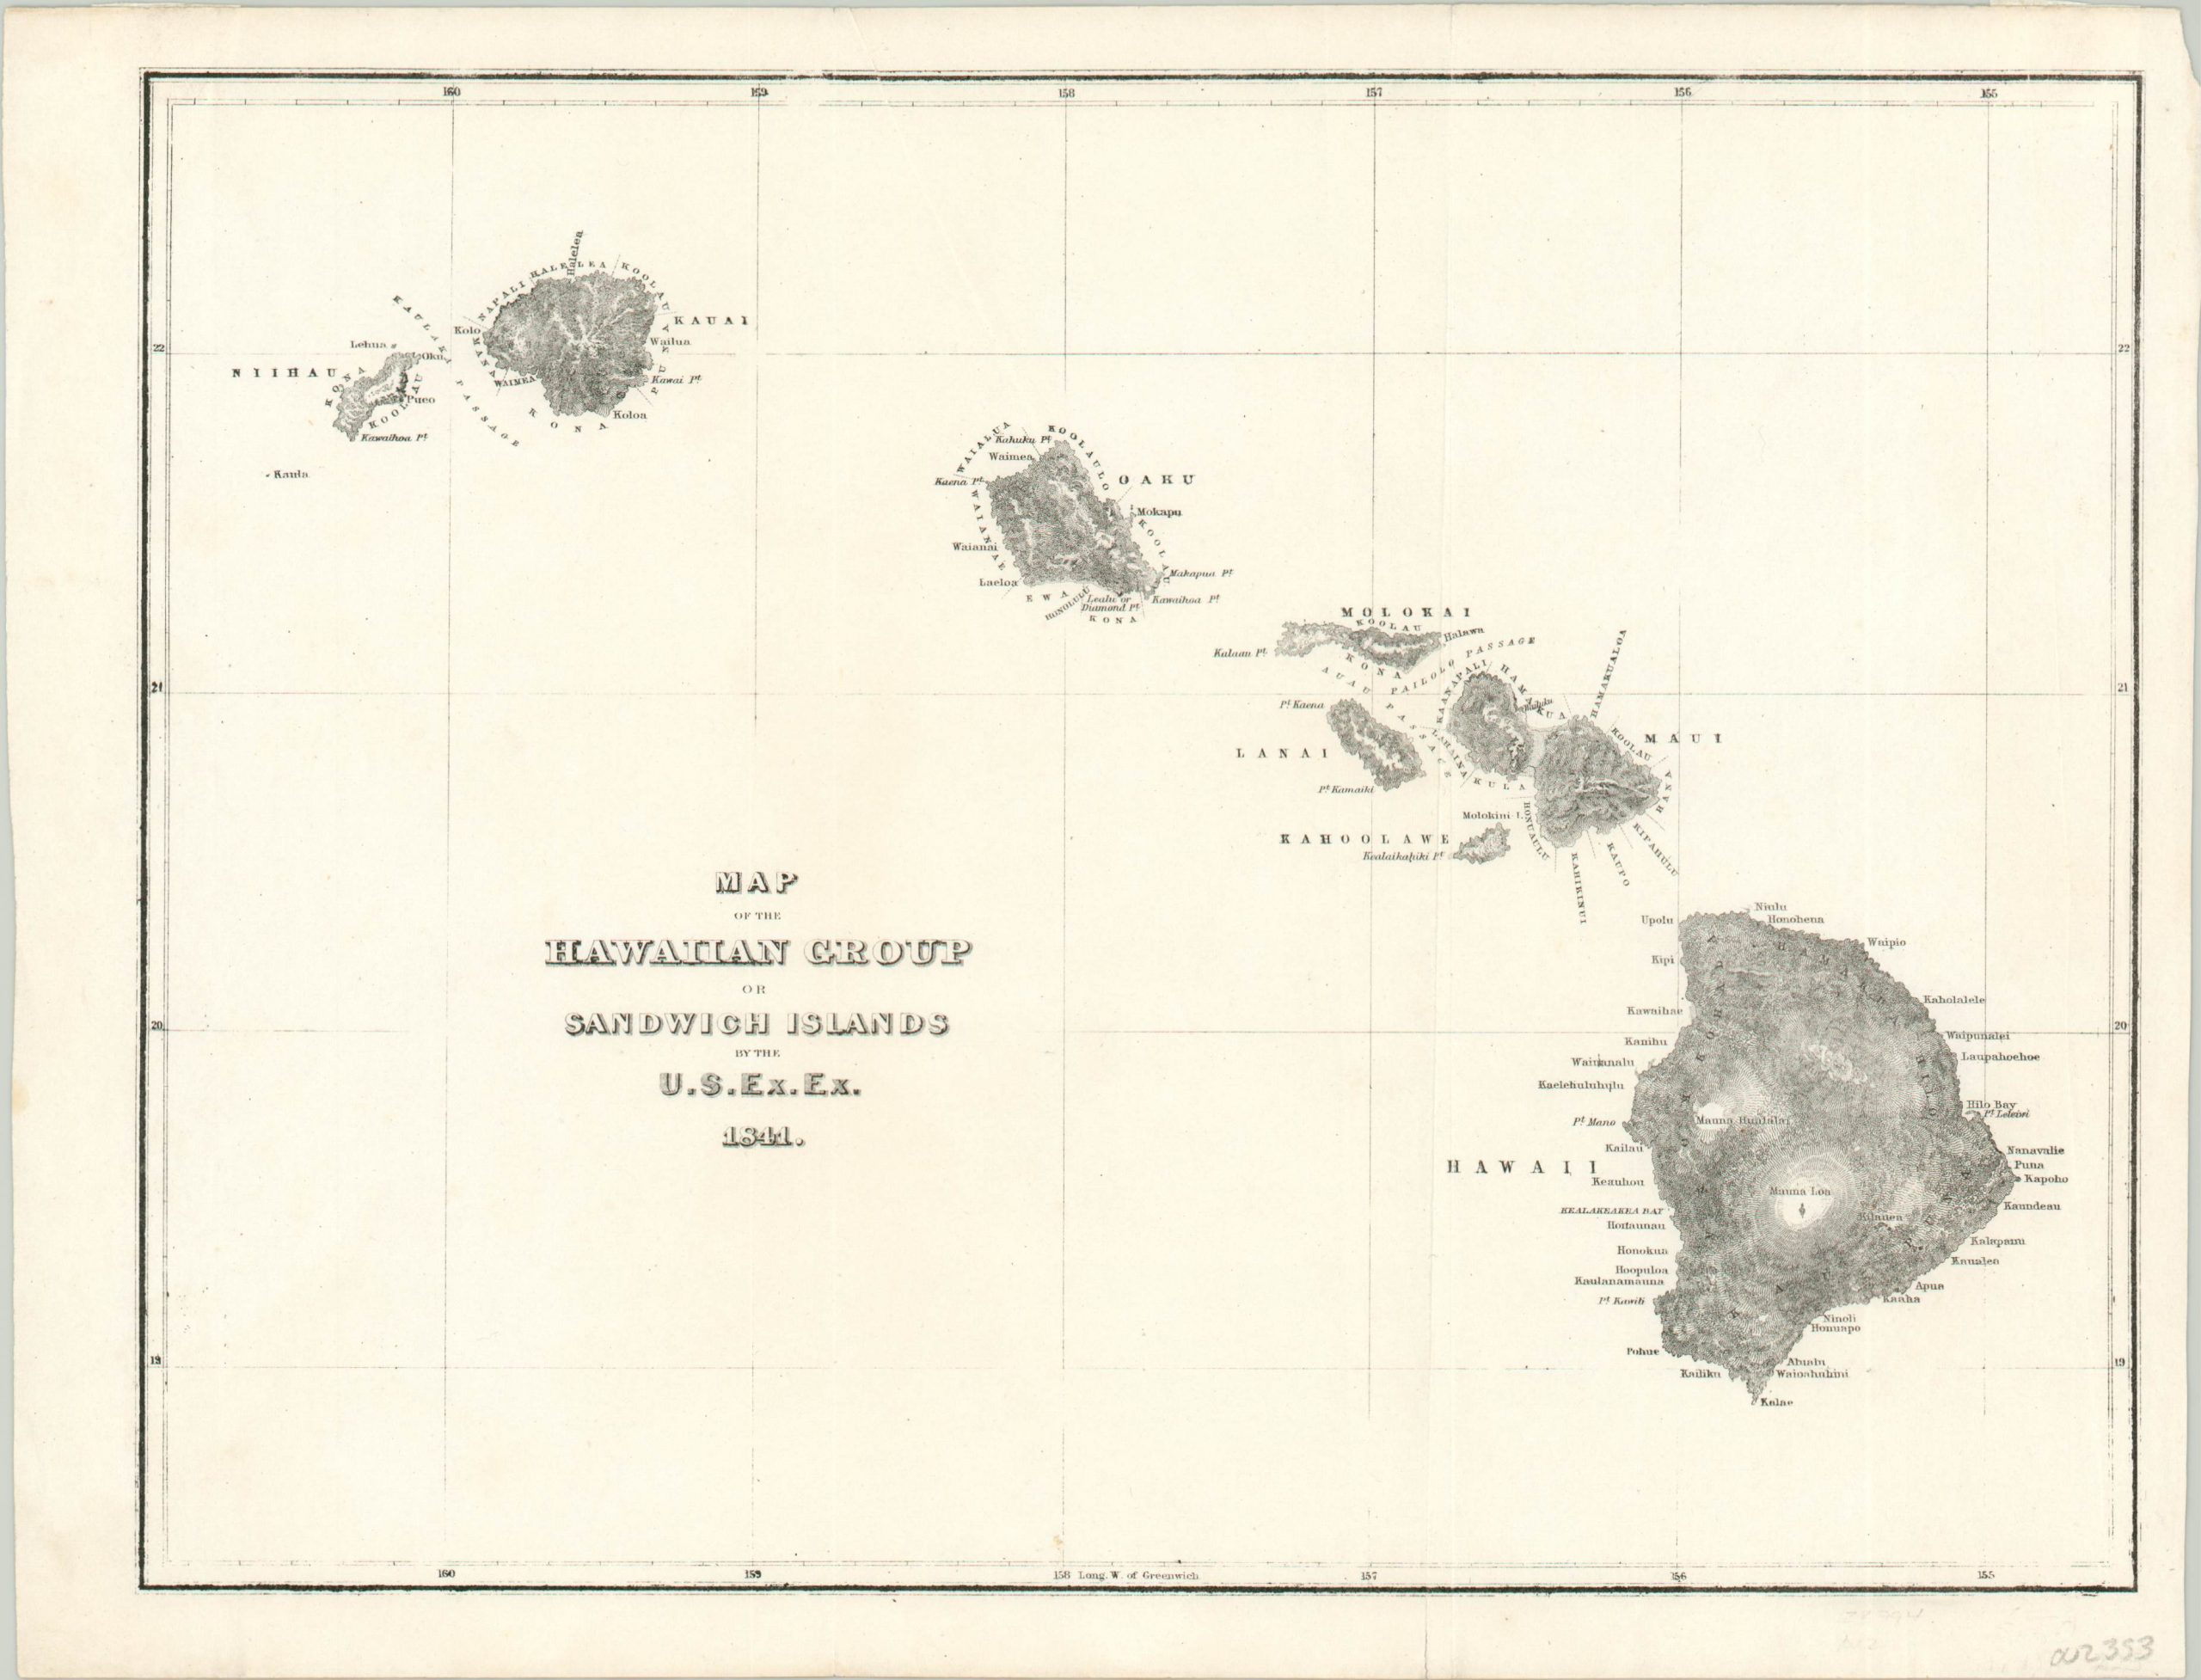 Map of the Hawaiian Group or Sandwich Islands by the U.S. Ex. Ex ...